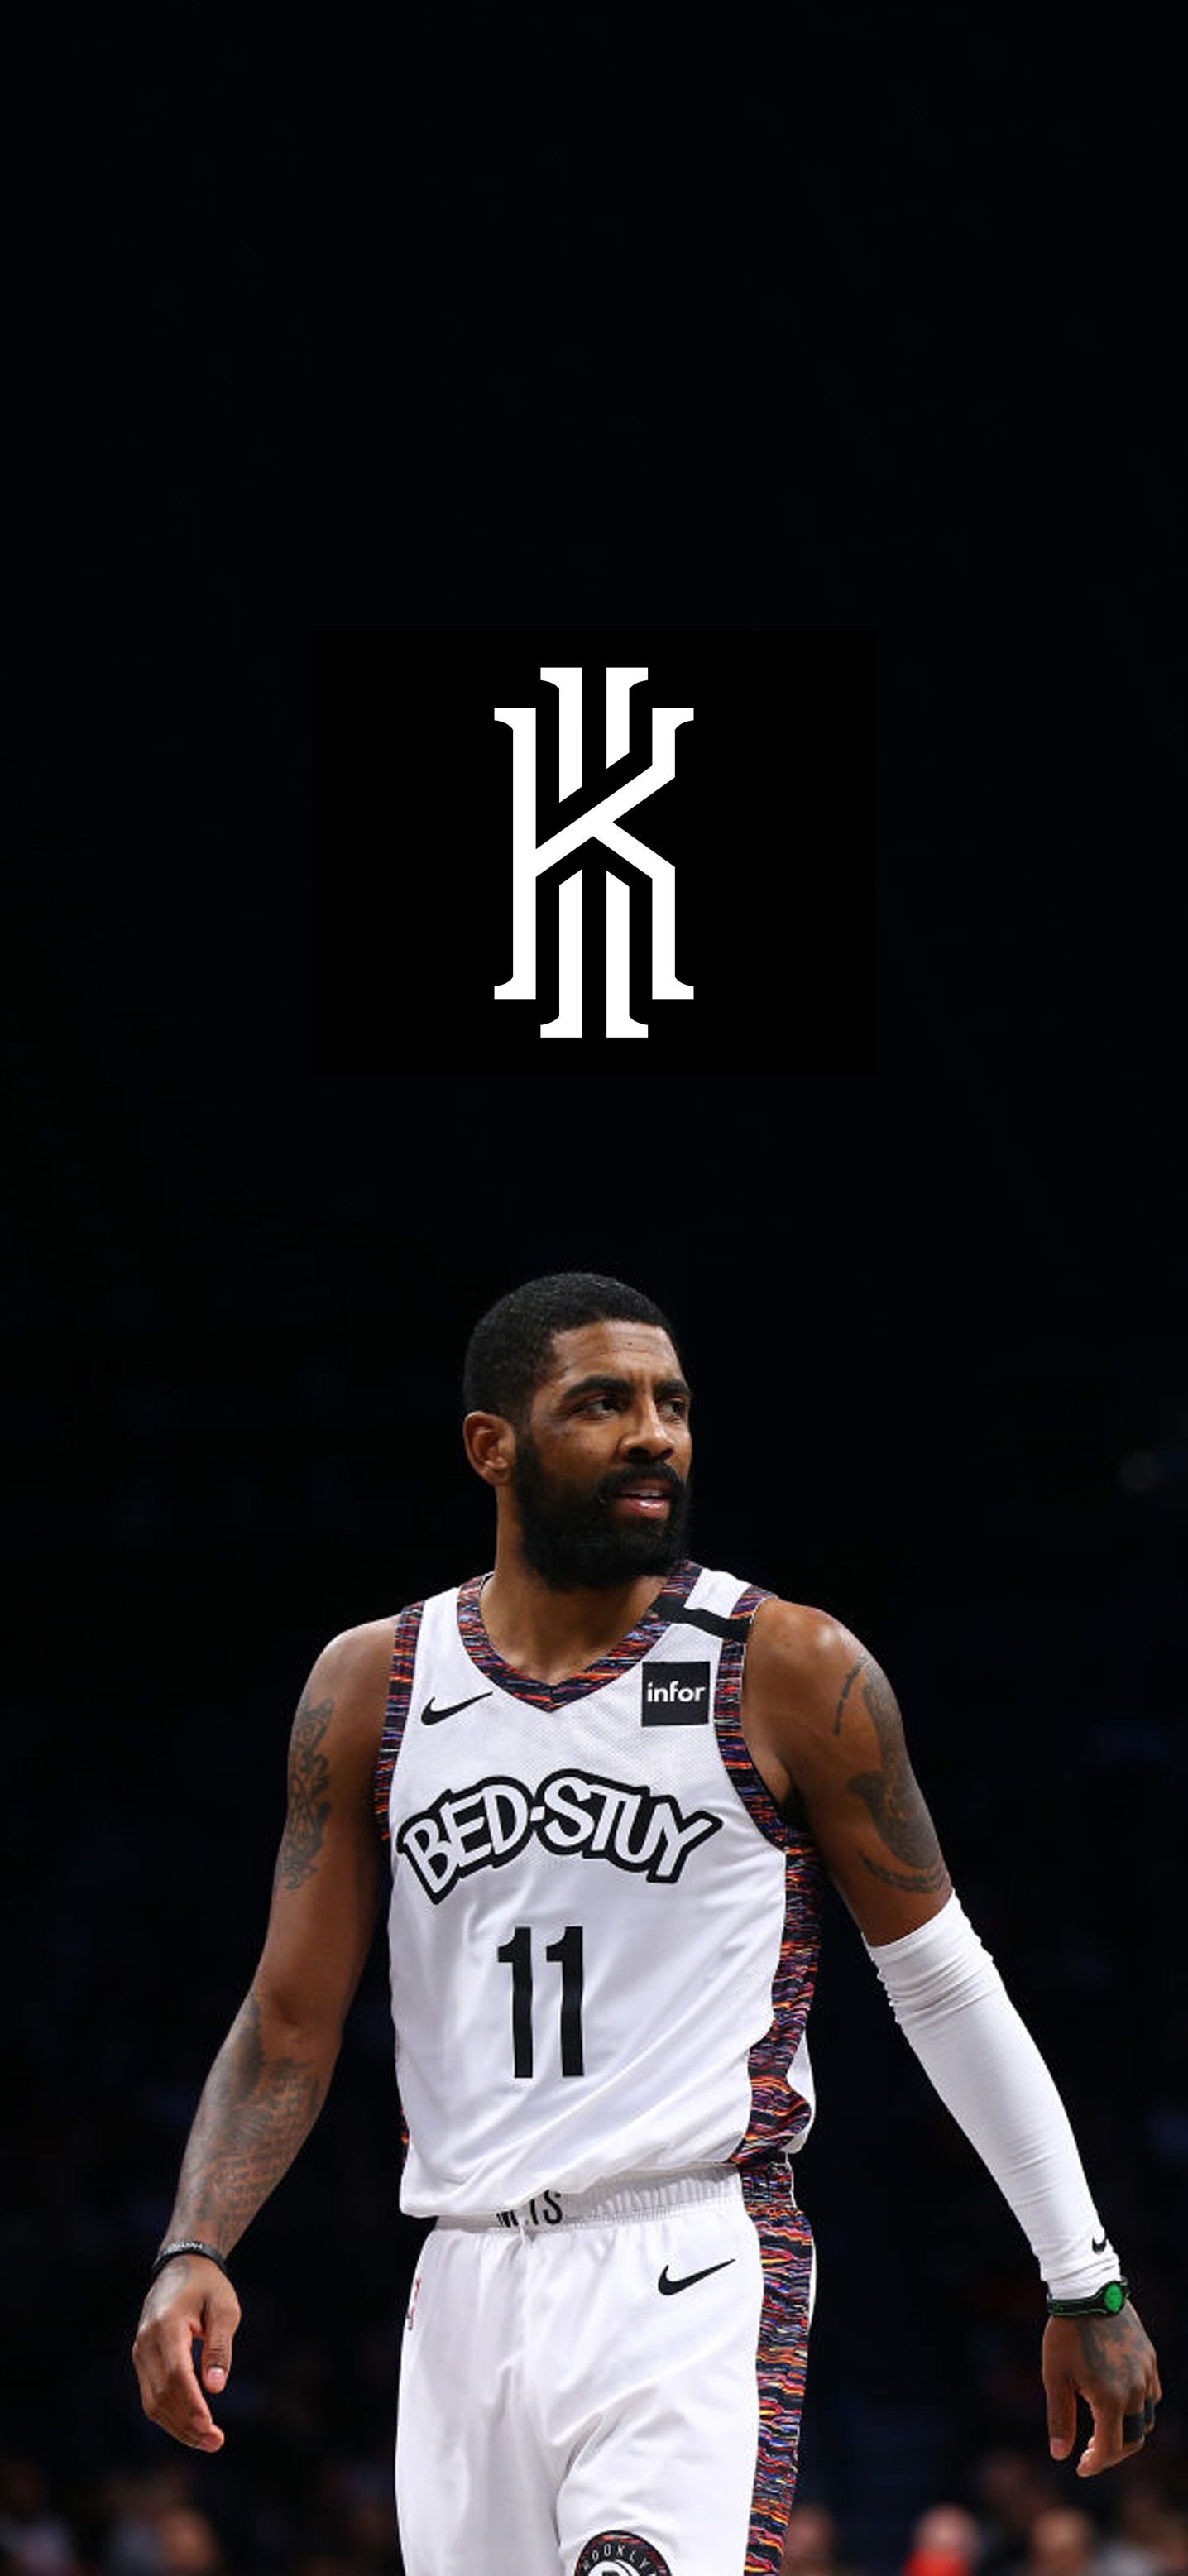 Download Kyrie Irving proudly displays his Brooklyn Nets jersey at his  introductory press conference Wallpaper